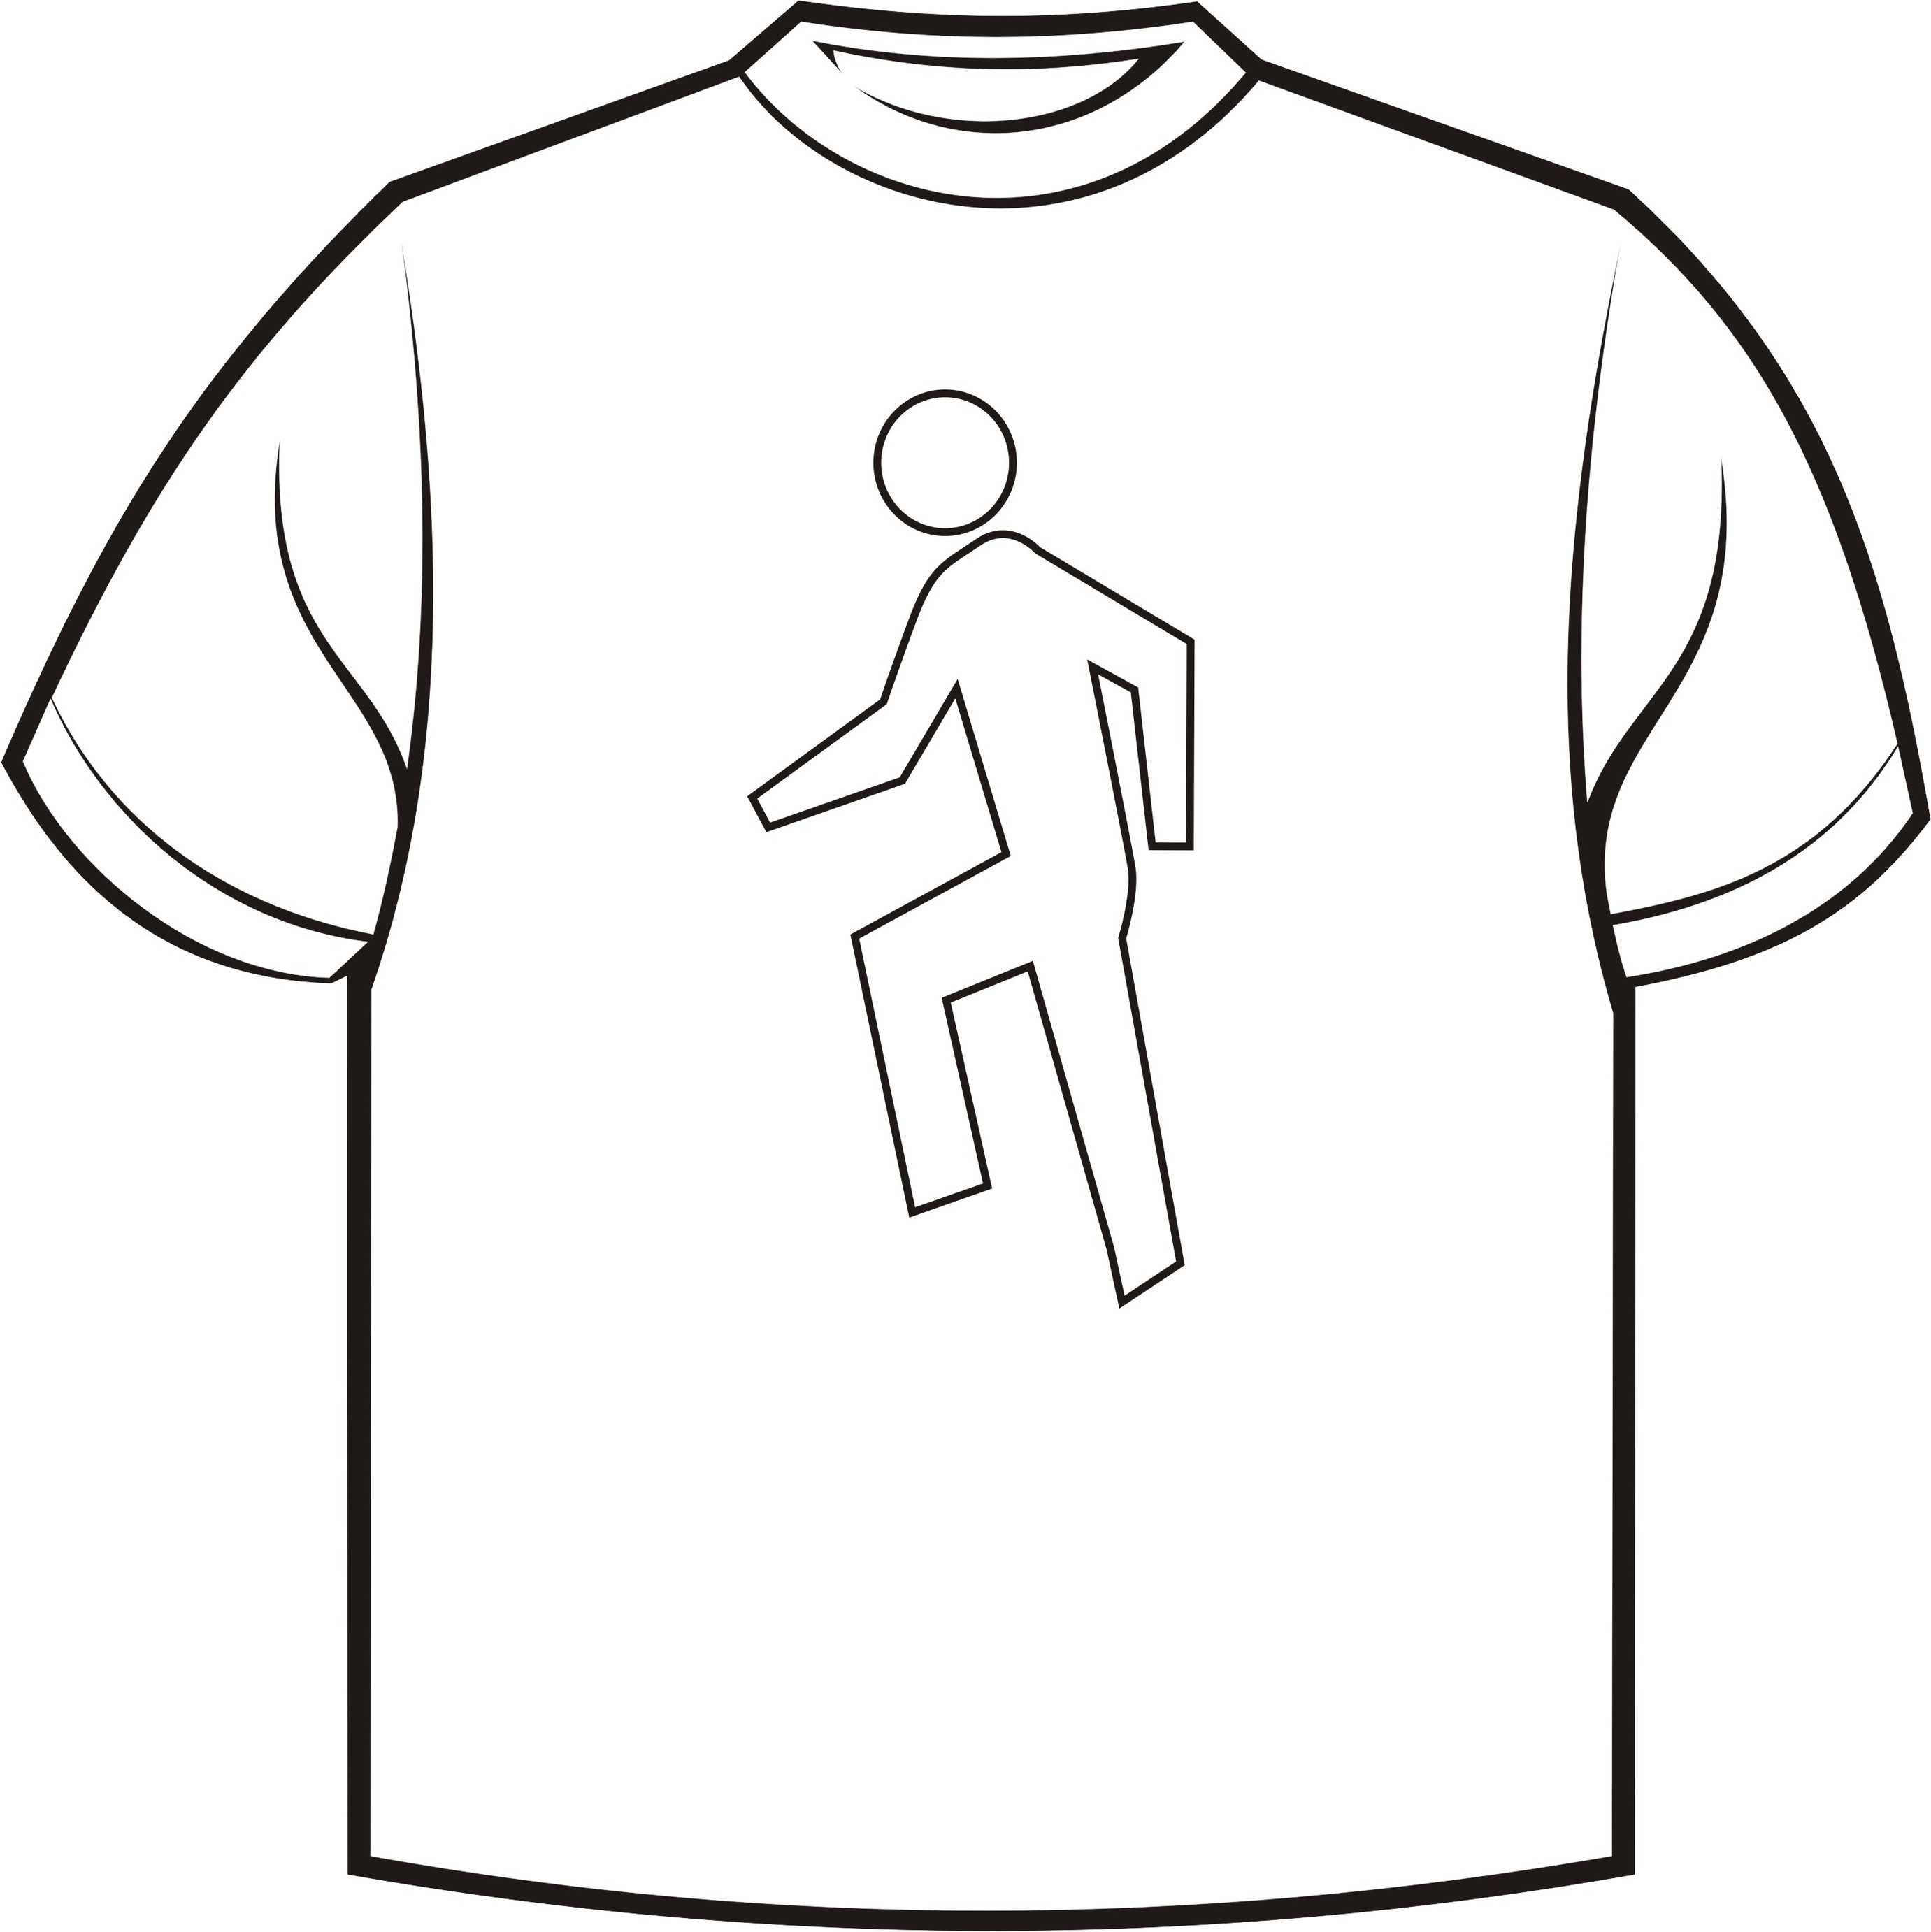 Tshirt Cartoon Outline Clipart - Free to use Clip Art Resource